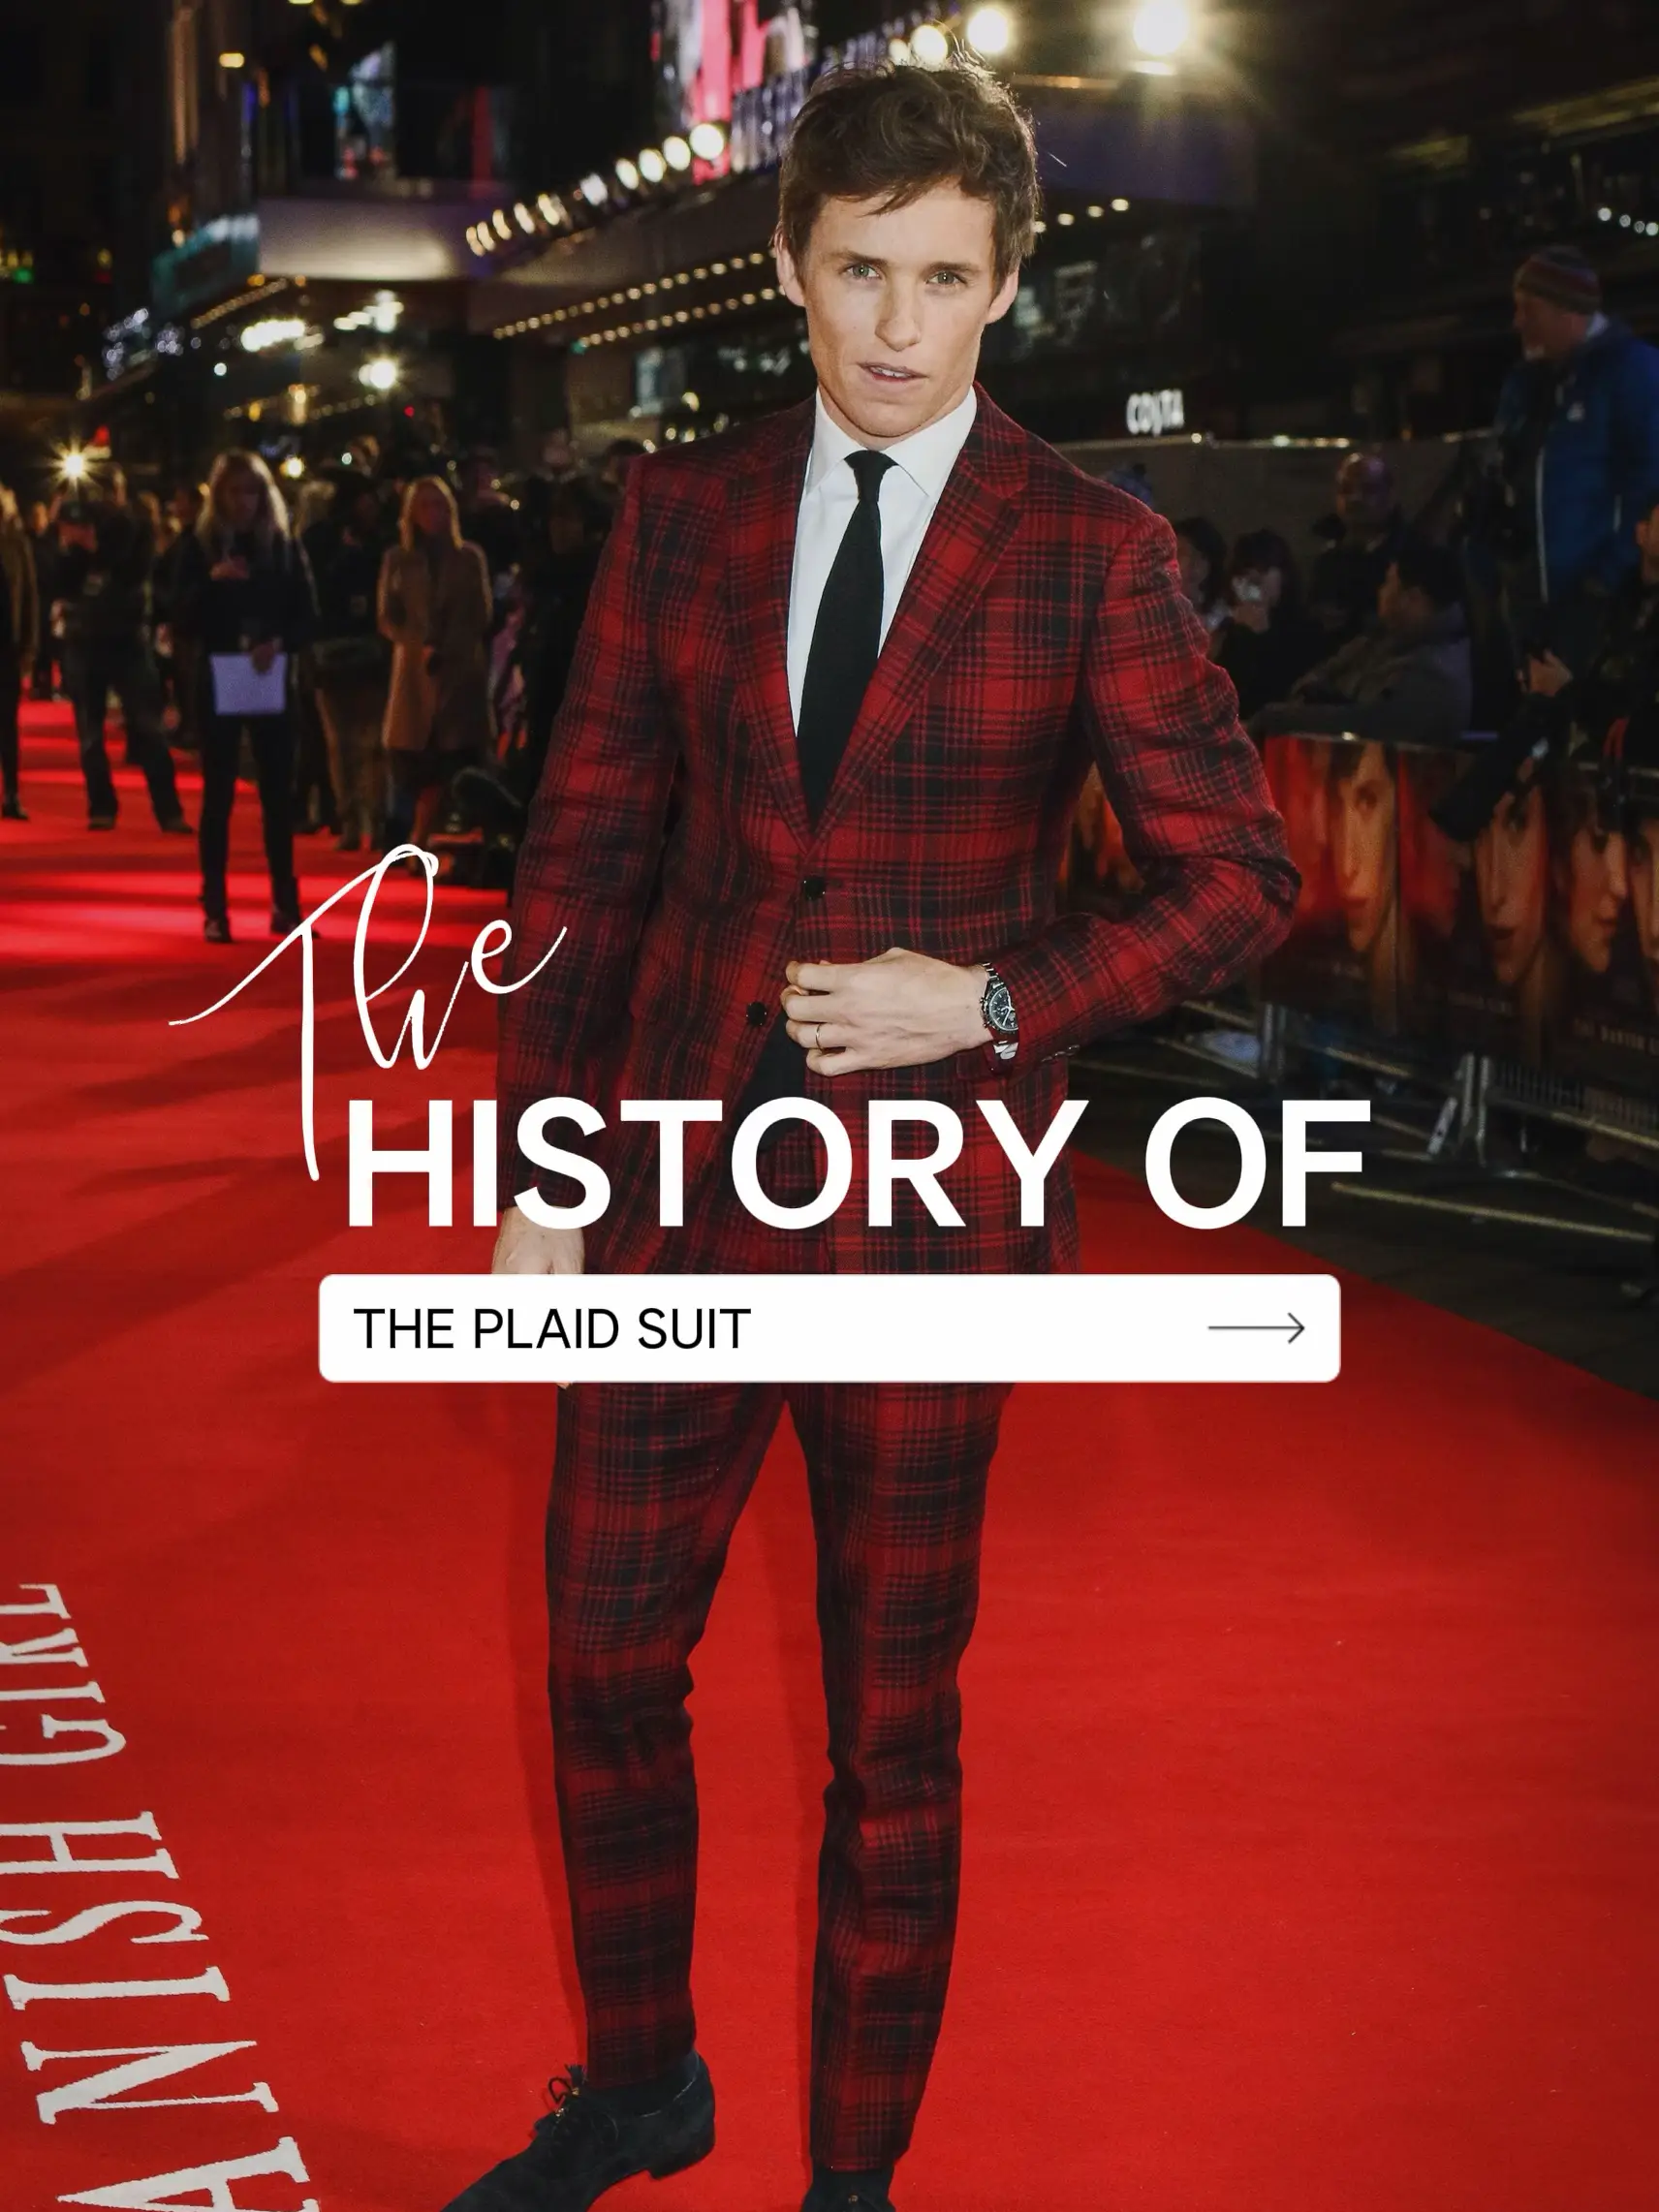 The History of Plaid